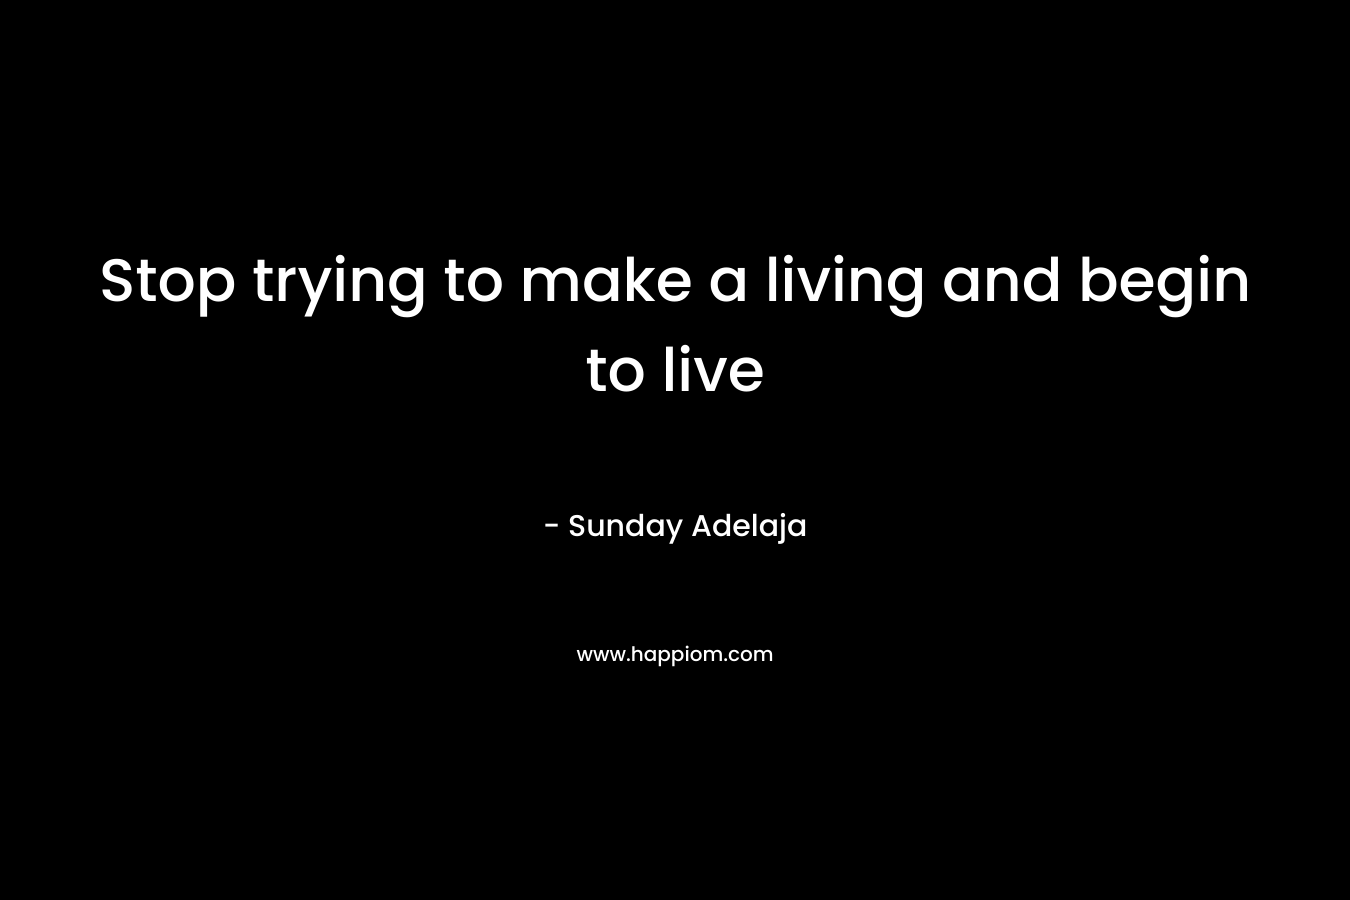 Stop trying to make a living and begin to live